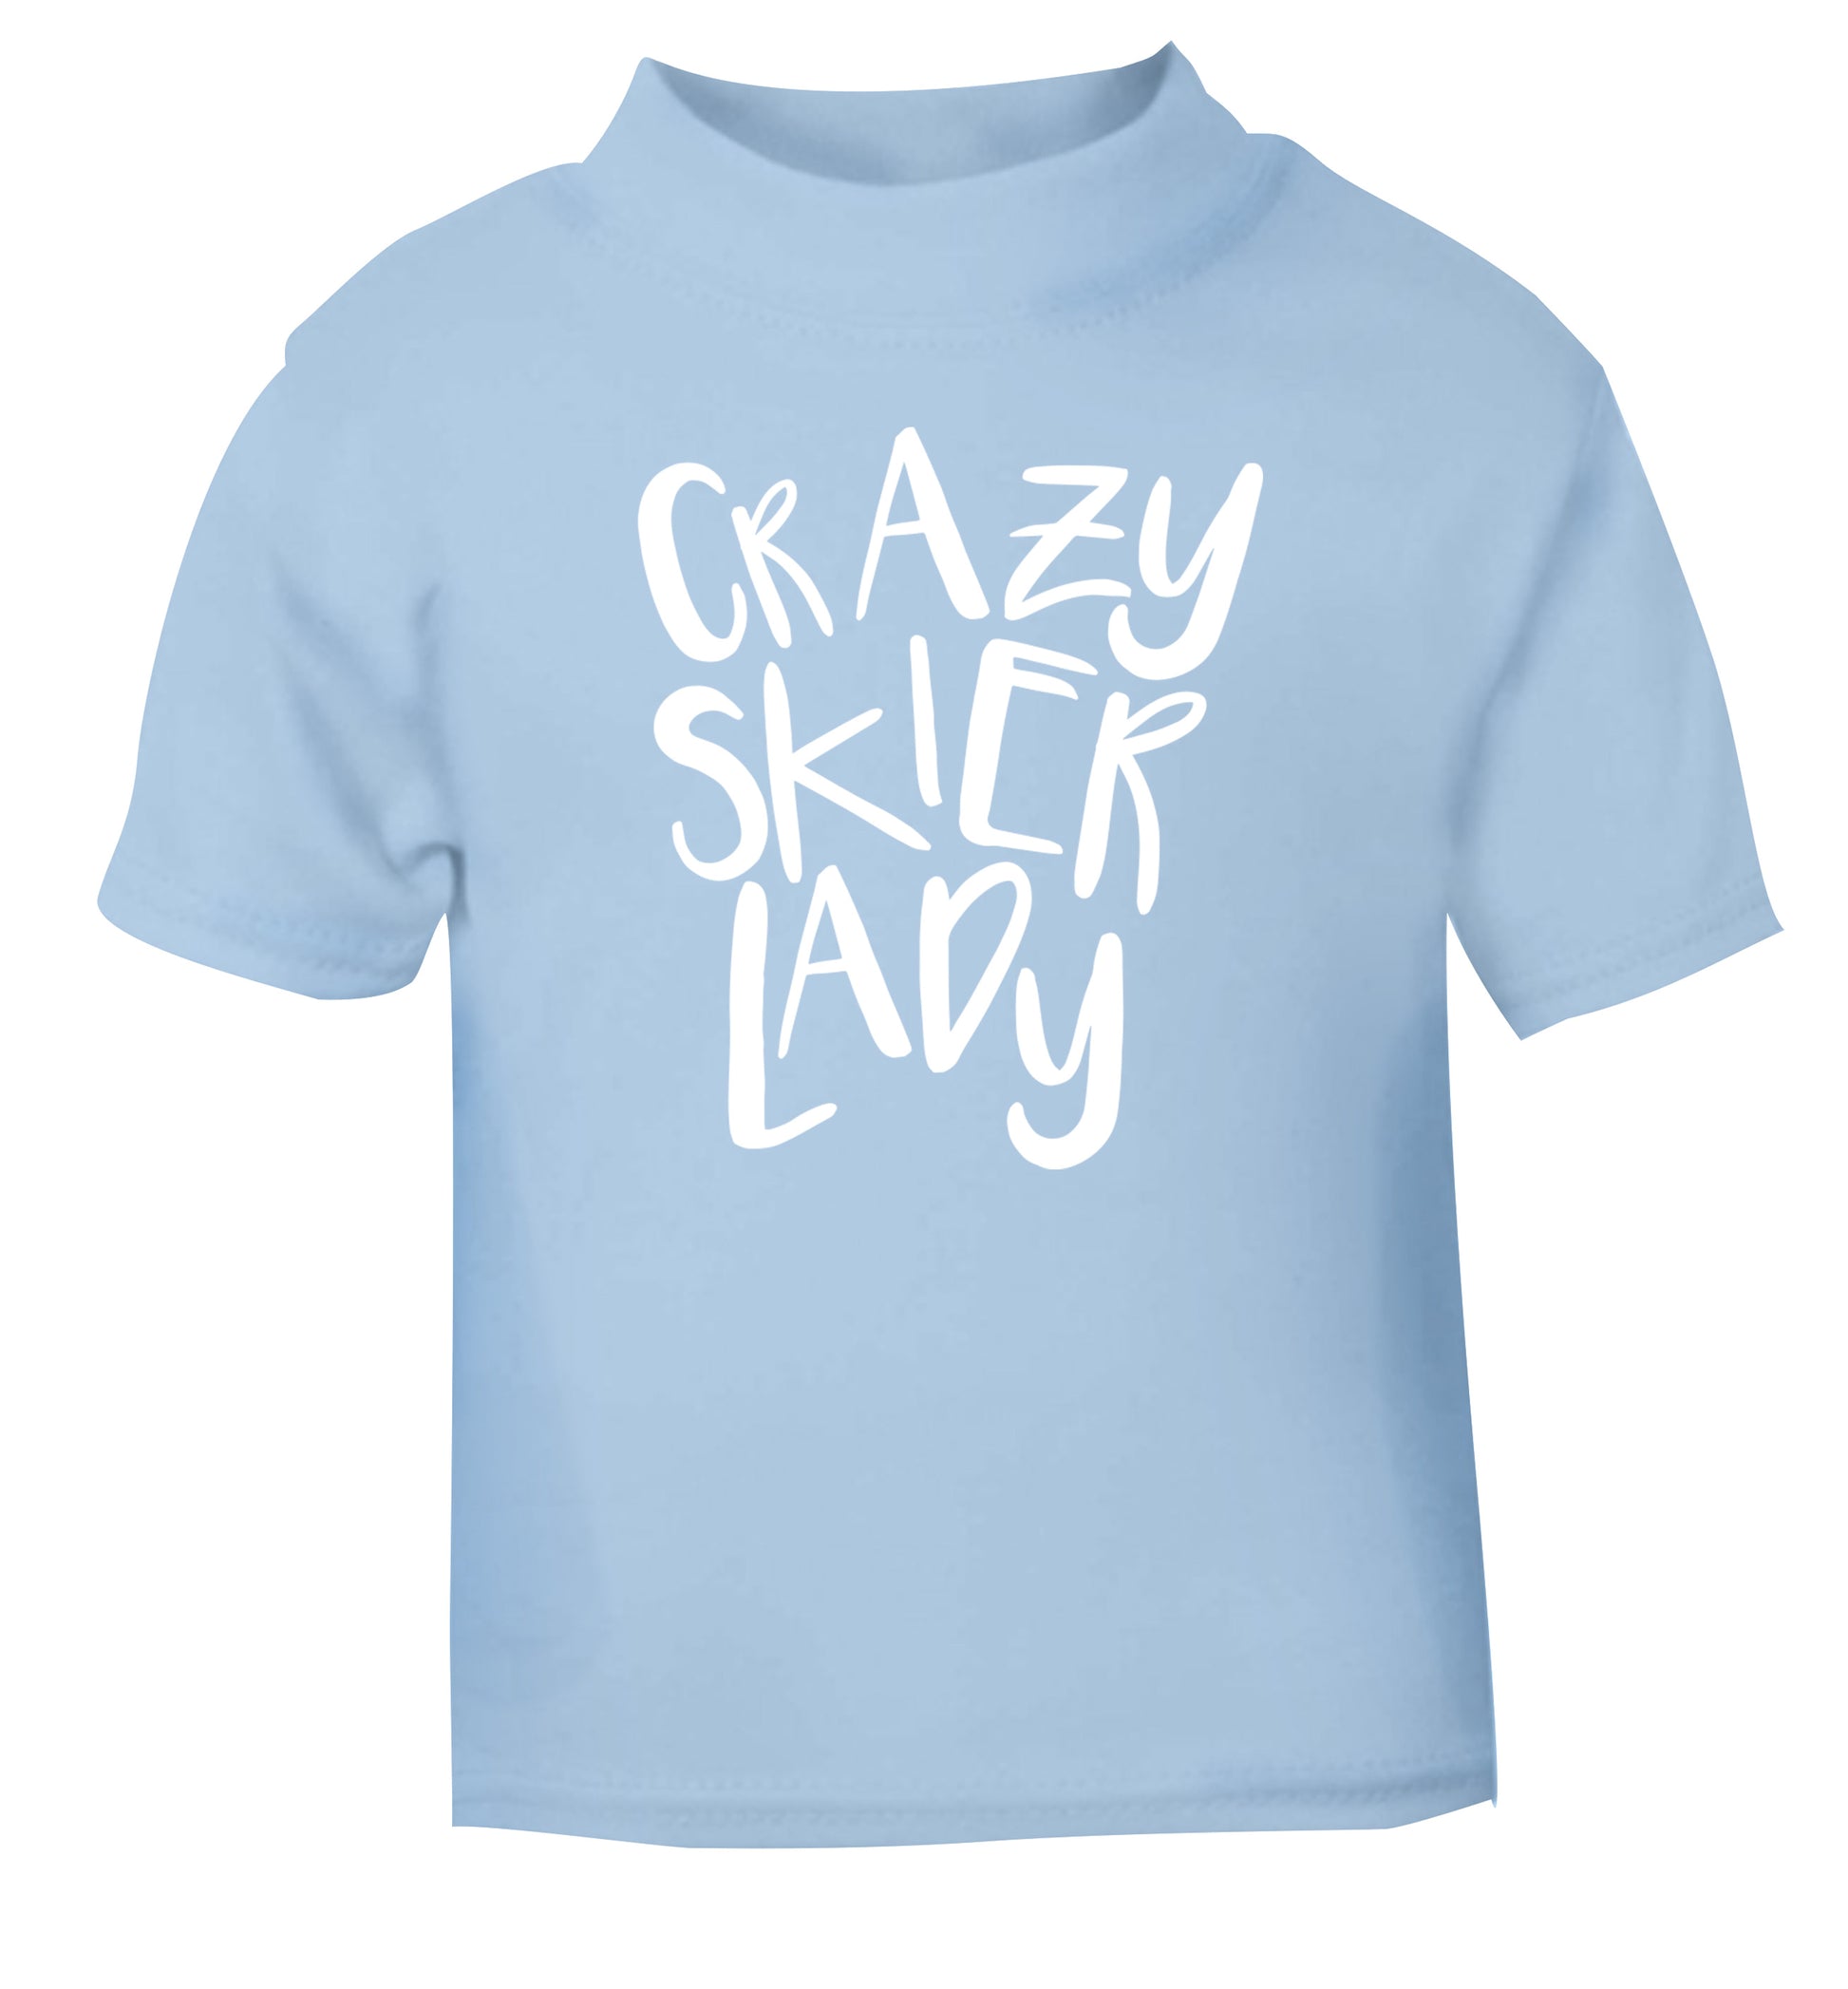 Crazy skier lady light blue Baby Toddler Tshirt 2 Years